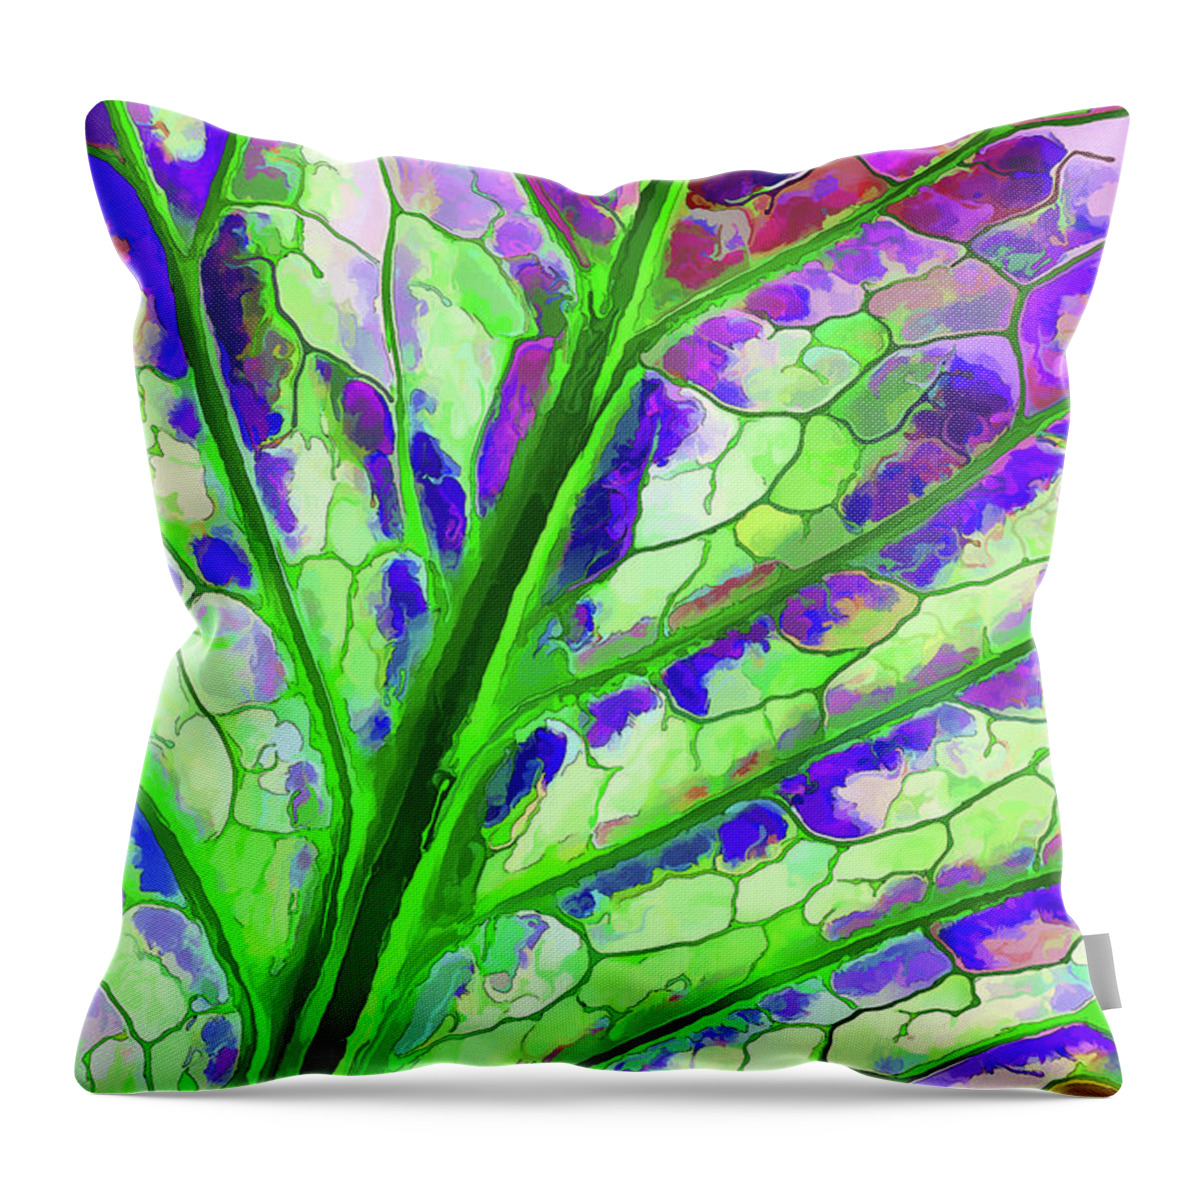 Nature Throw Pillow featuring the digital art Colorful Coleus Abstract 4 by ABeautifulSky Photography by Bill Caldwell